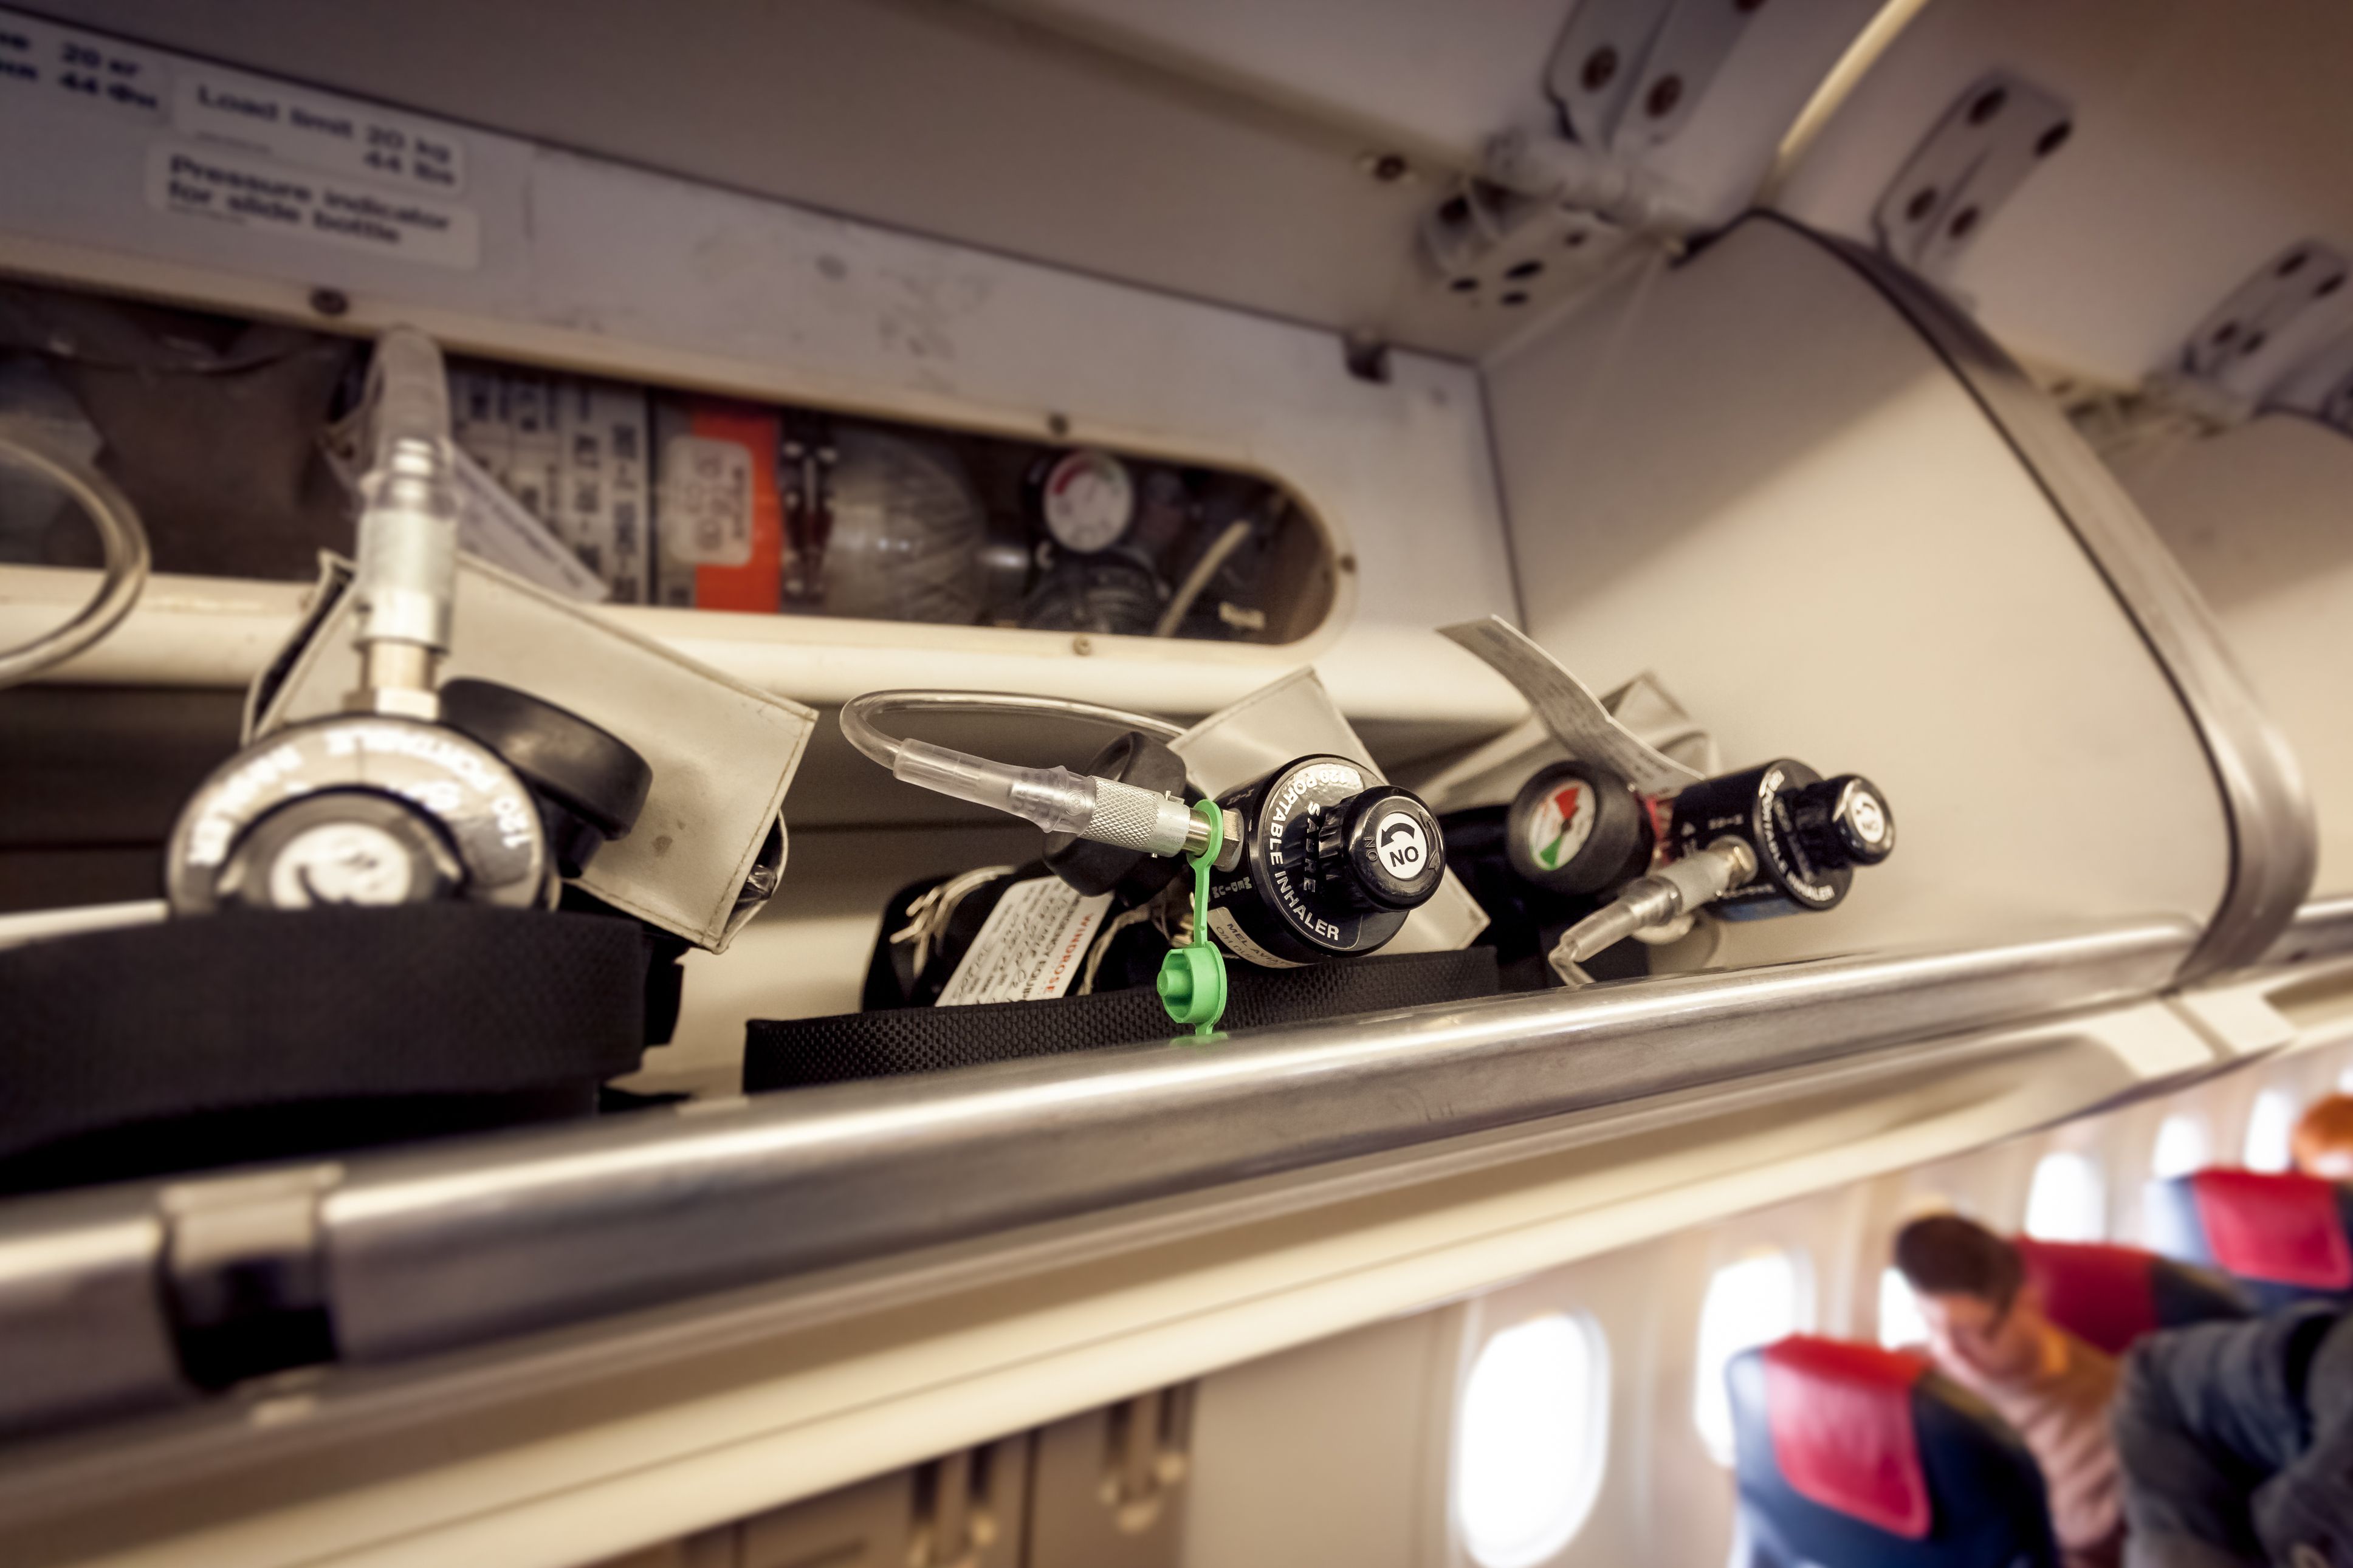 The portable oxygen cylinders in their dedicated overhead storage unit.